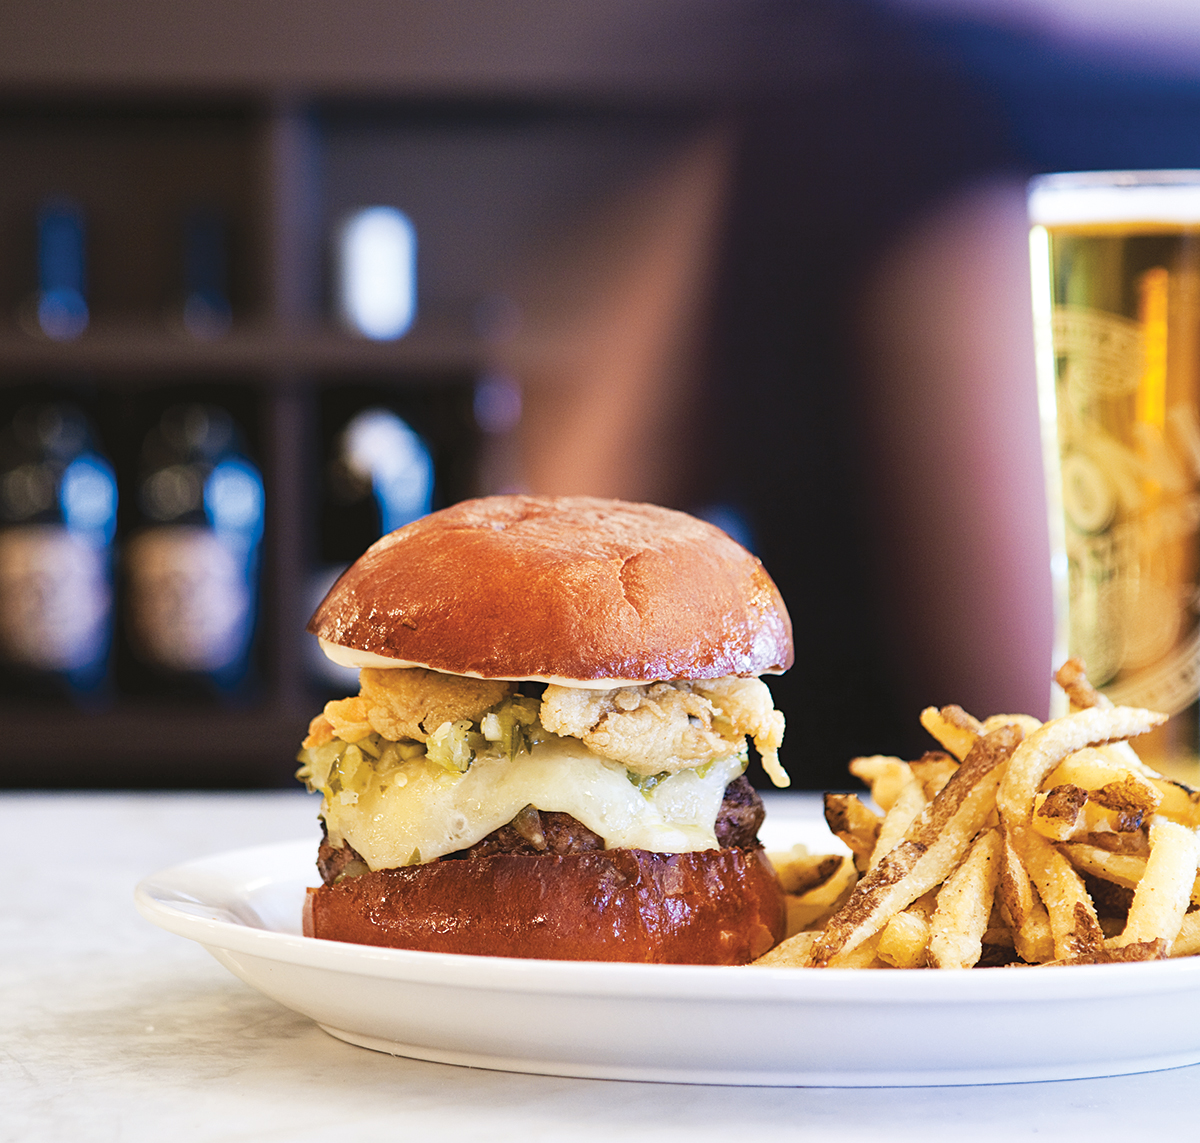 The neptuneburger comes laden with fried oysters and cheddar. Photo by Keller + Keller.